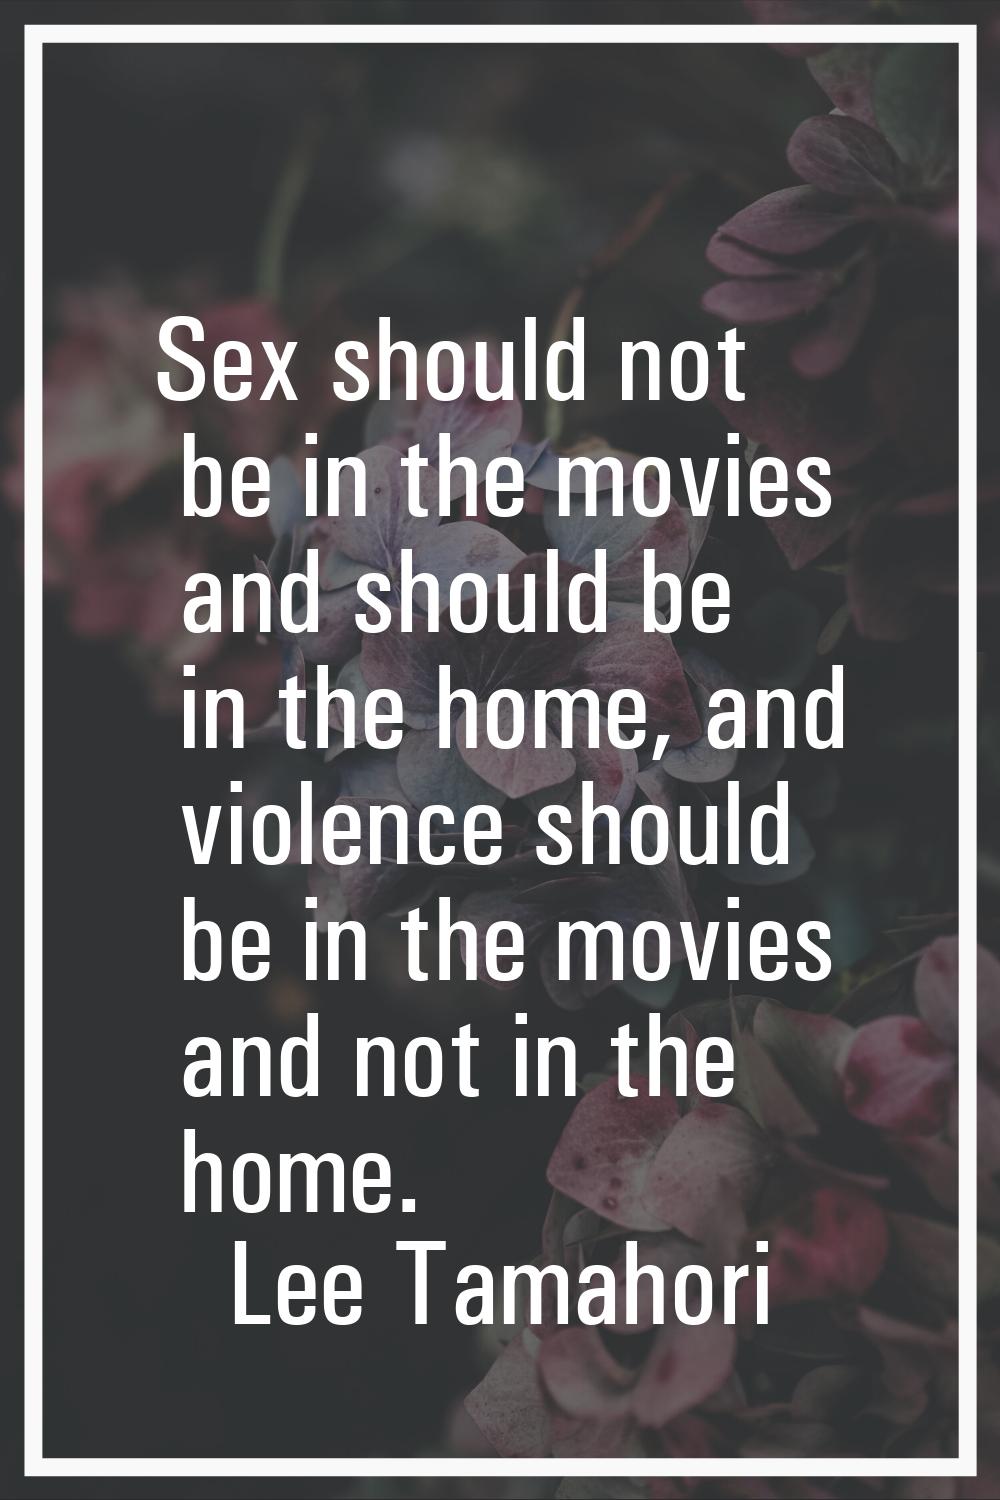 Sex should not be in the movies and should be in the home, and violence should be in the movies and